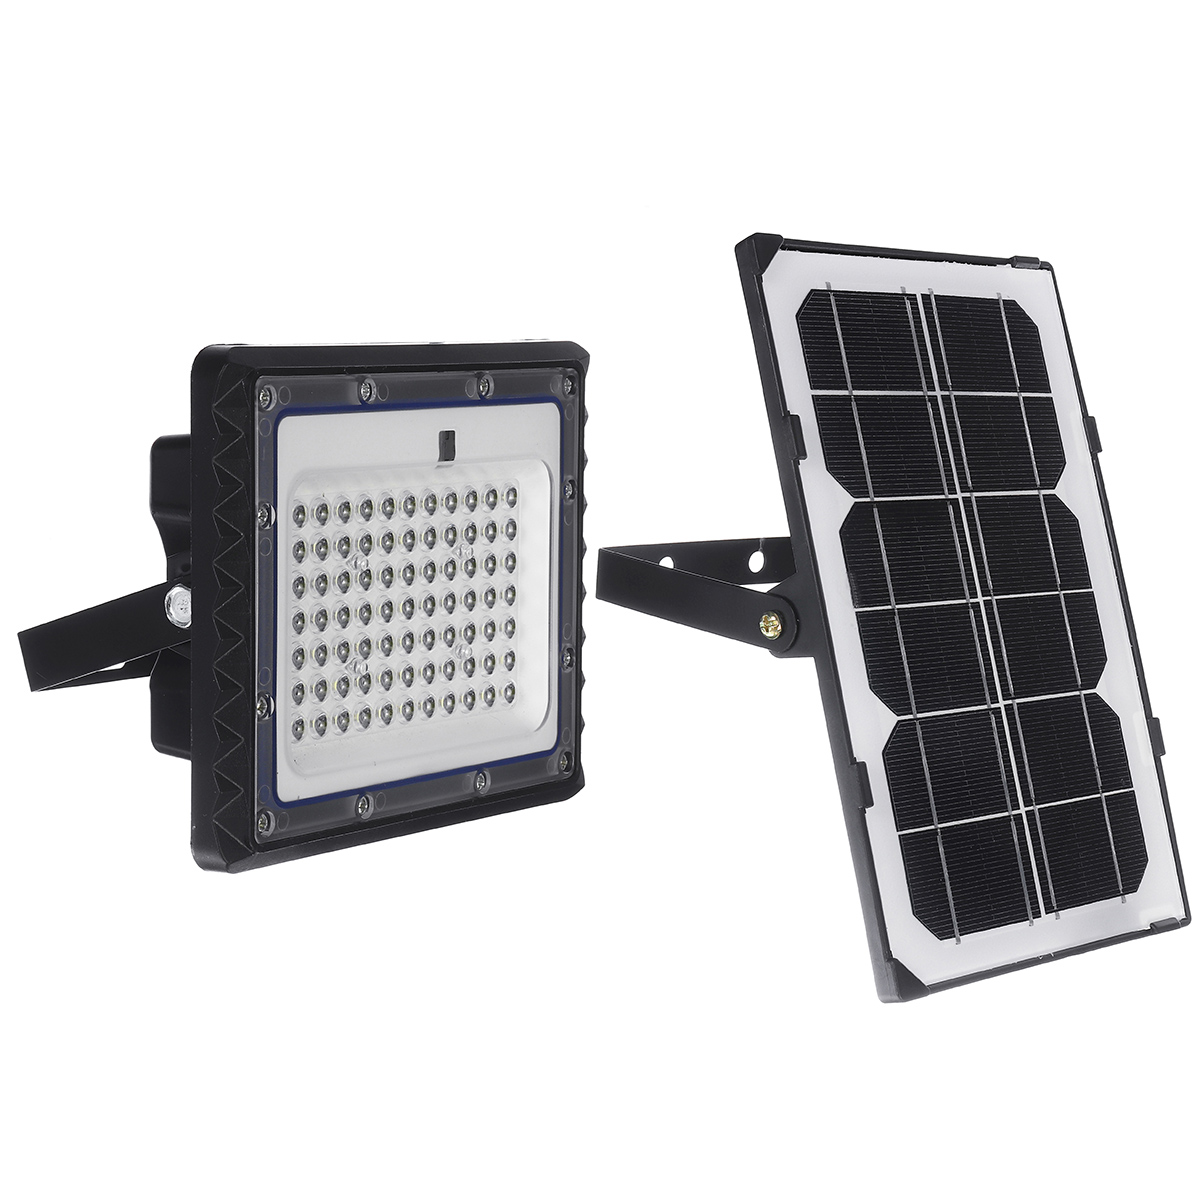 77128247368LED-Solar-Flood-Light-SMD2835-Outdoor-Garden-Street-Wall-Lamp--Remote-Control-1754920-3